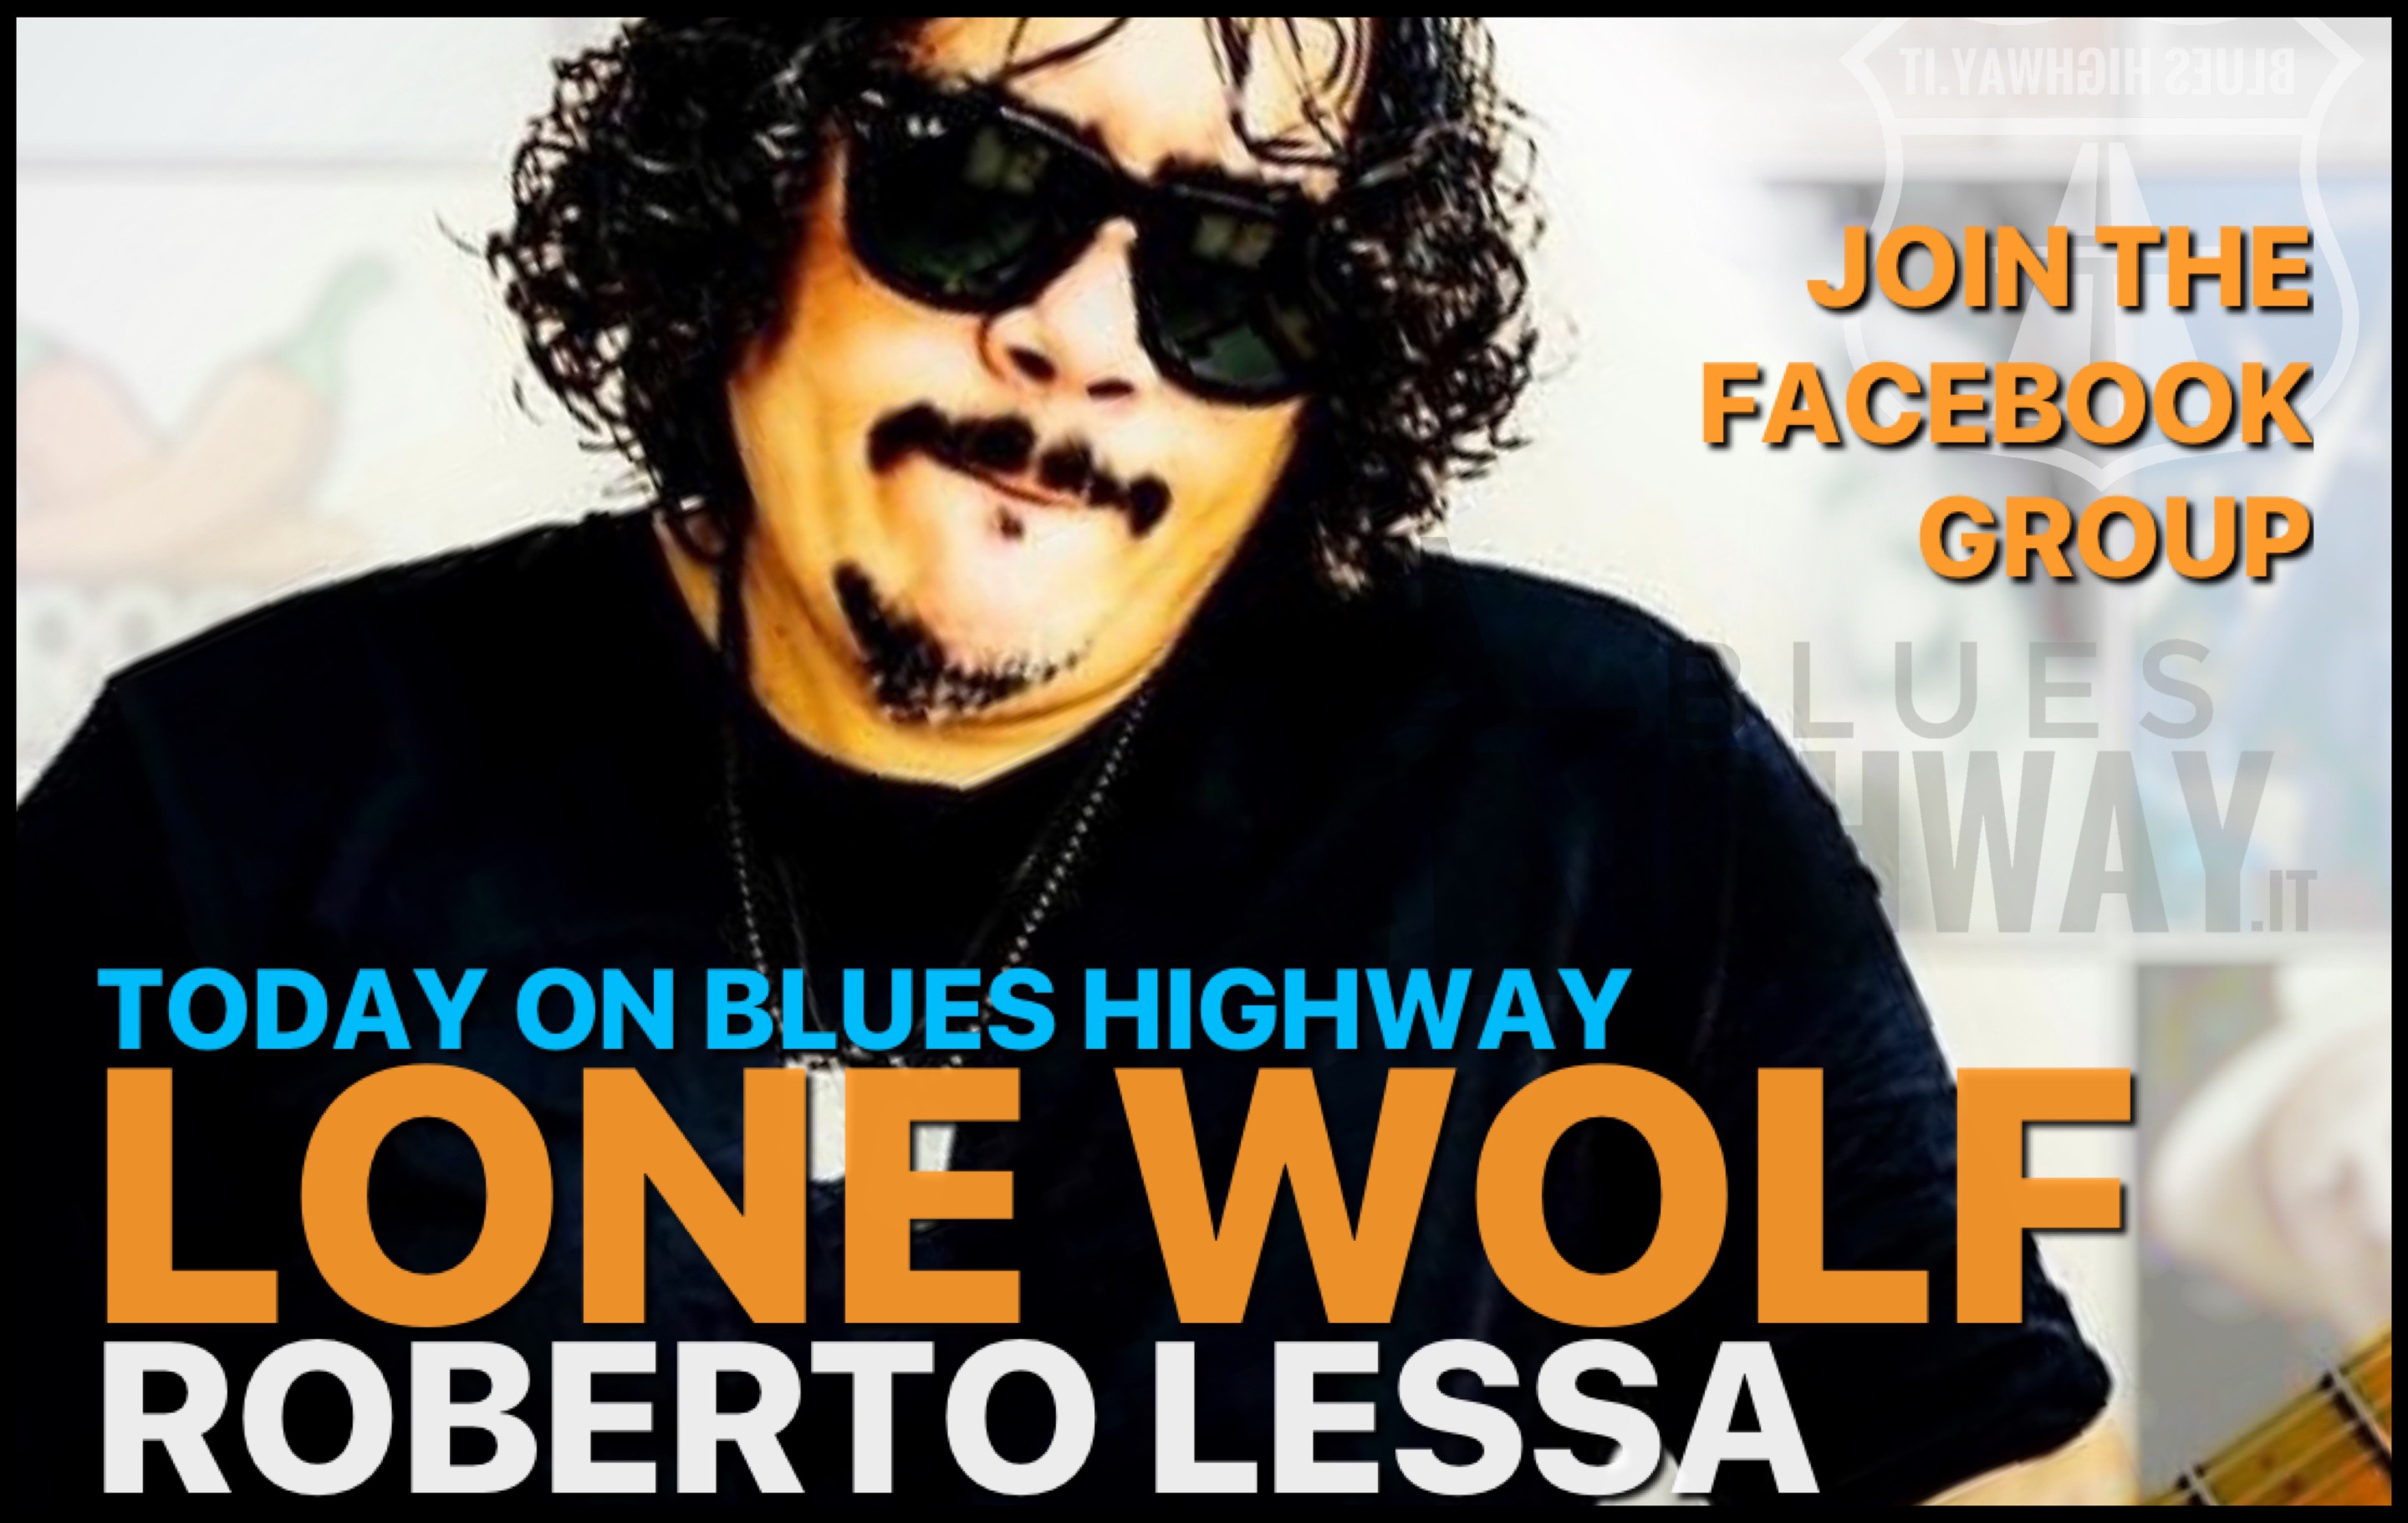 TODAY ON BLUES HIGHWAY - ROBERTO LESSA - "LONE WOLF"